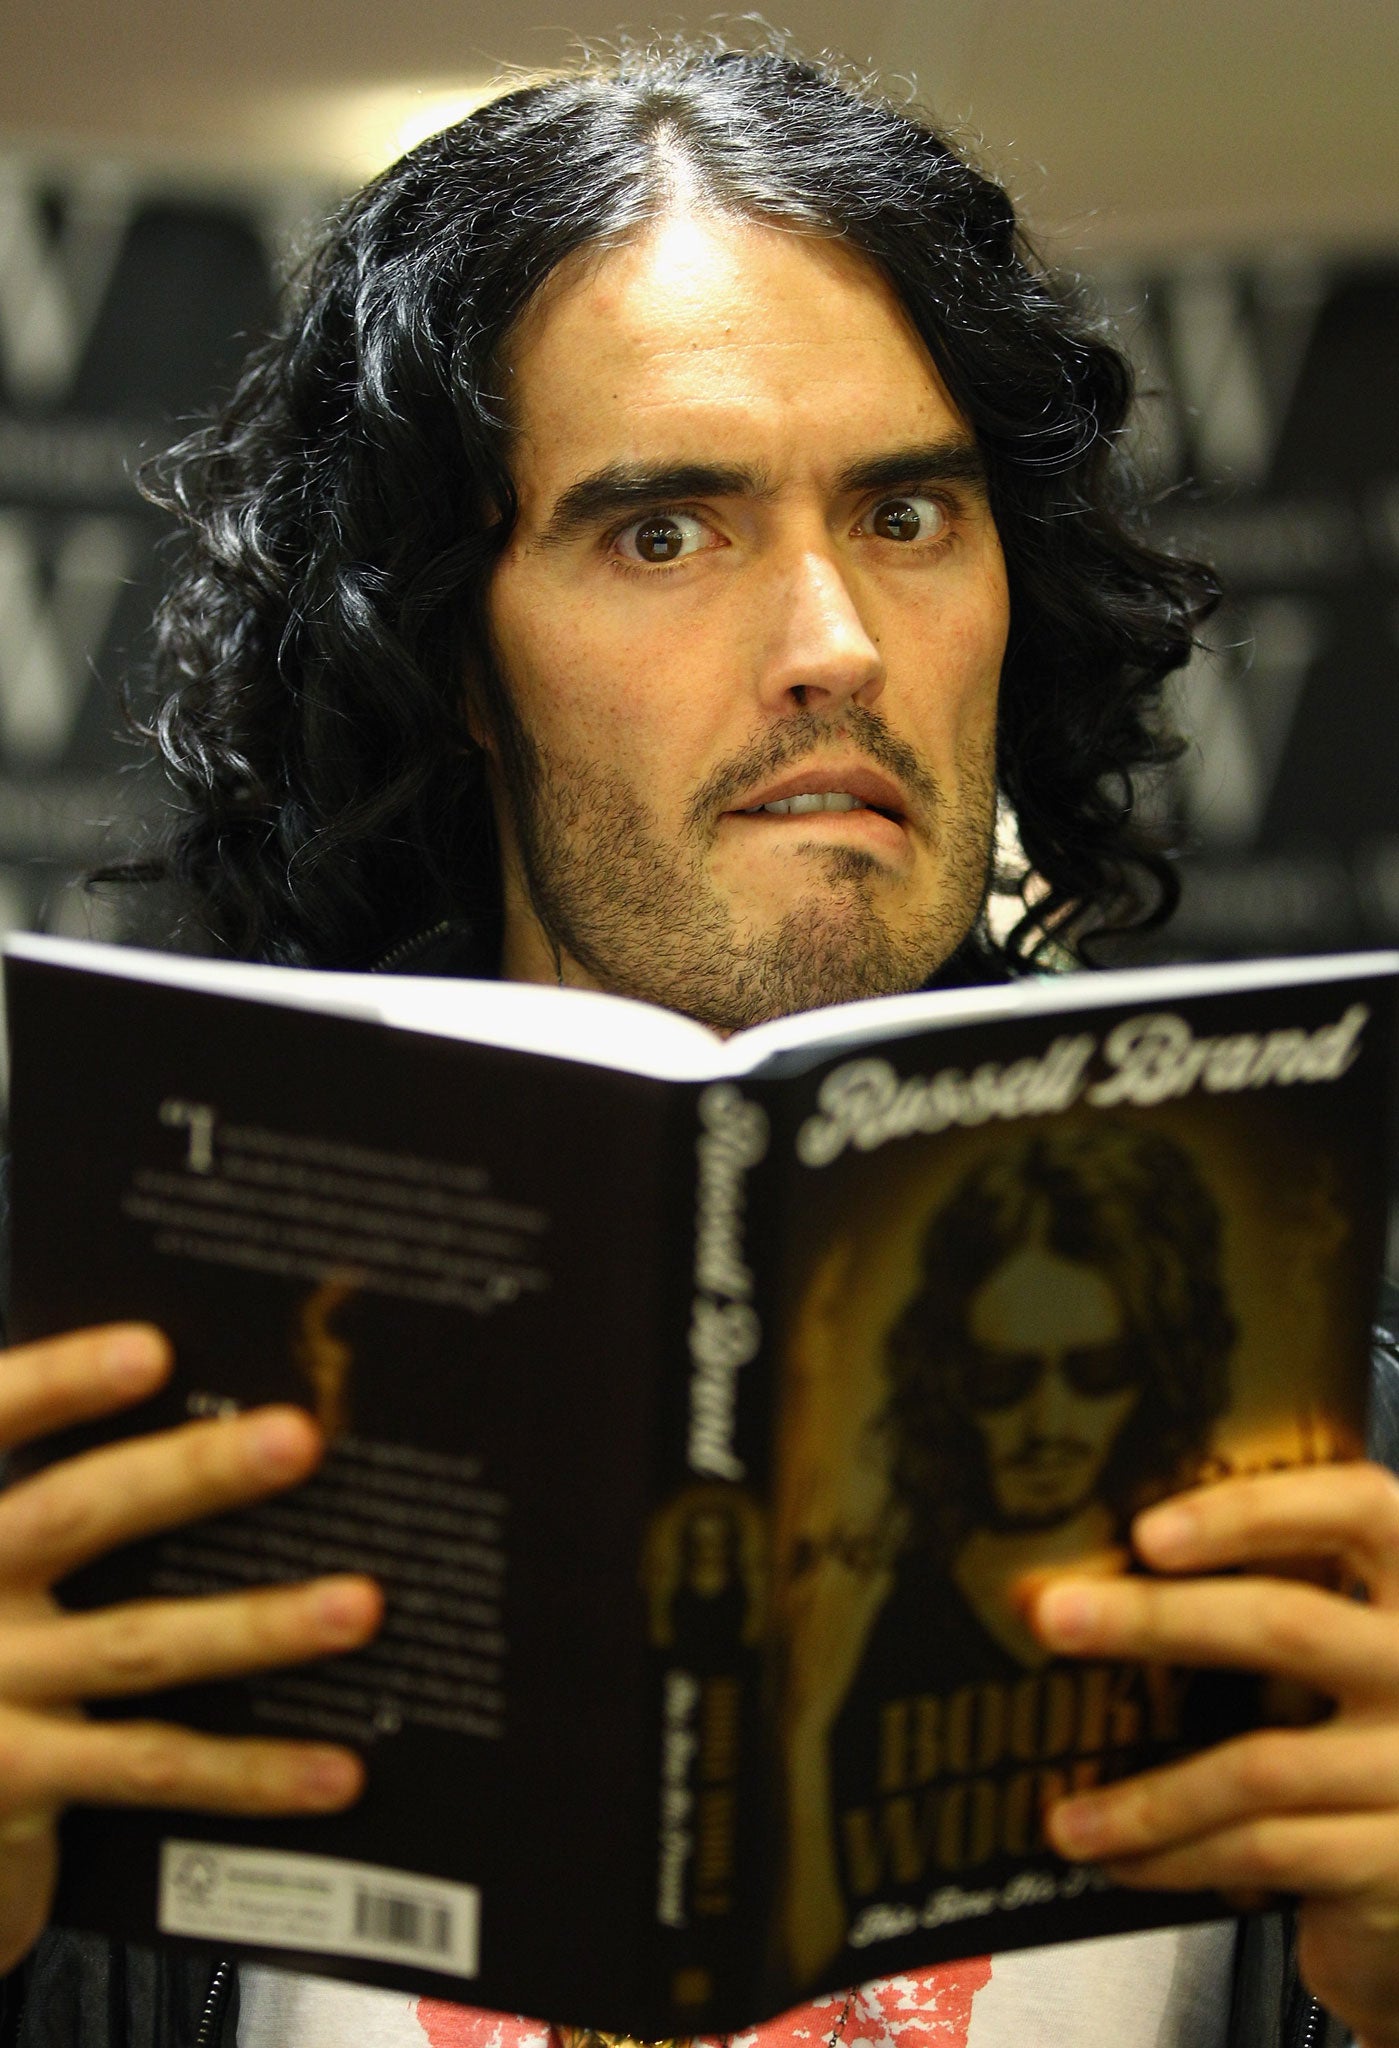 'My Booky Wook', by Russell Brand: An appeal that this was a reference to A Clockwork Orange was turned down